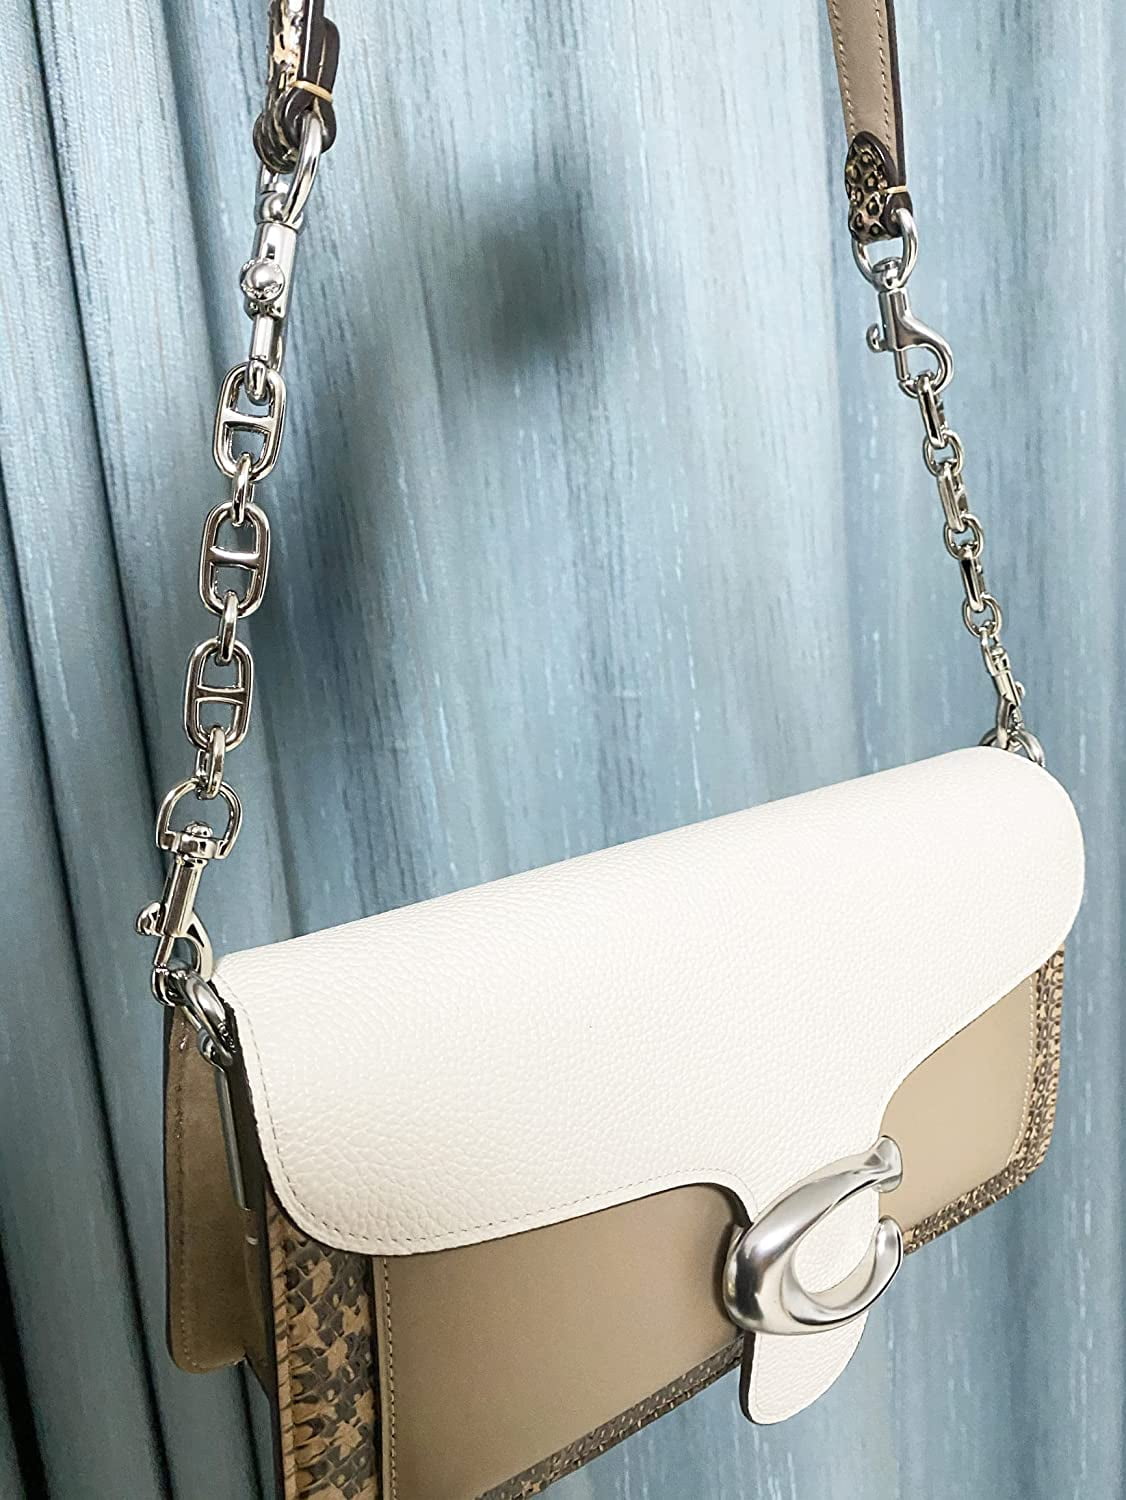 Chain Strap Extender Accessory for Louis Vuitton Bags & More